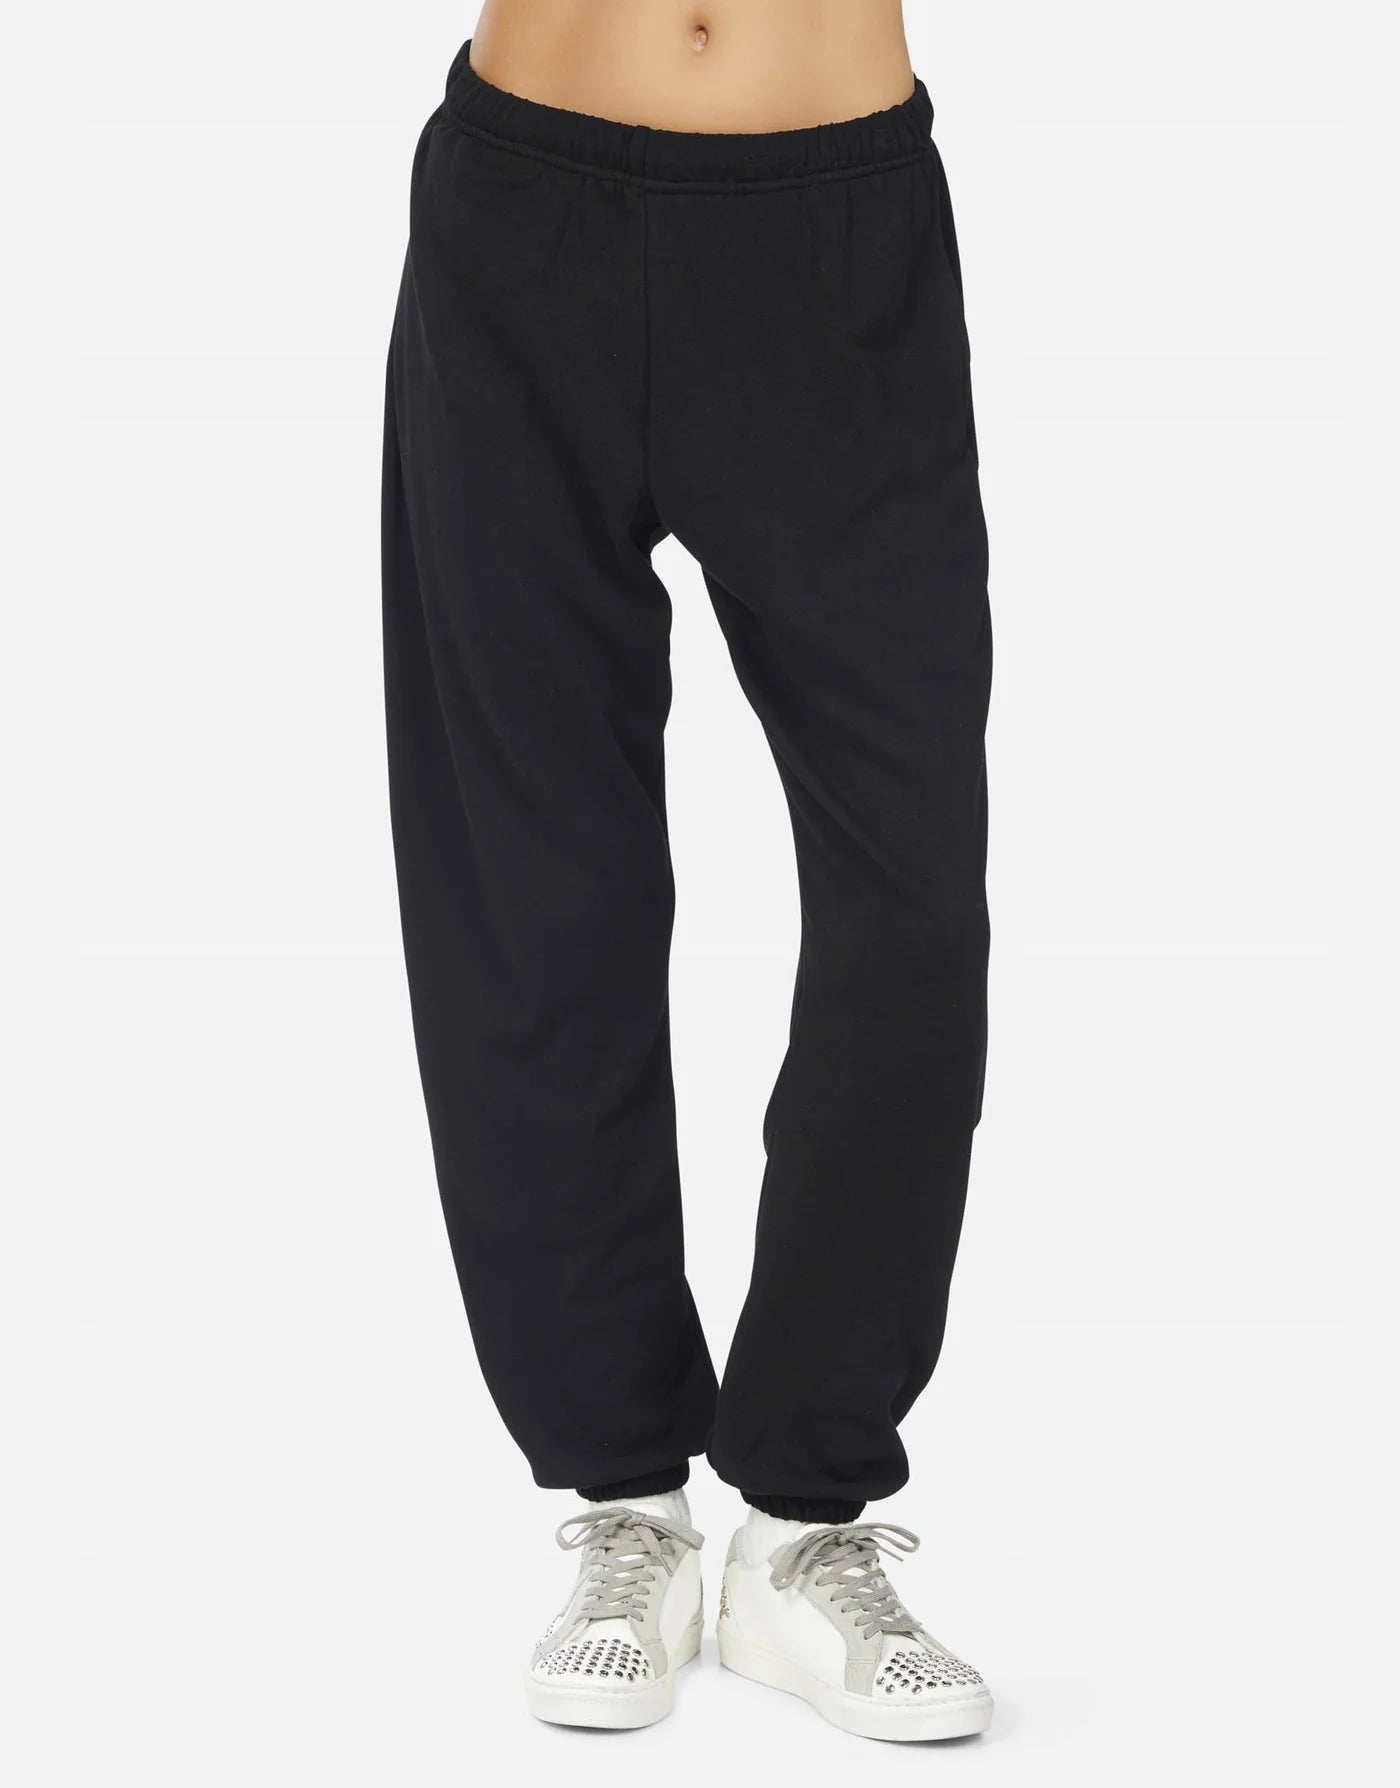 Viper Sweatpants in Black - Something about Sofia